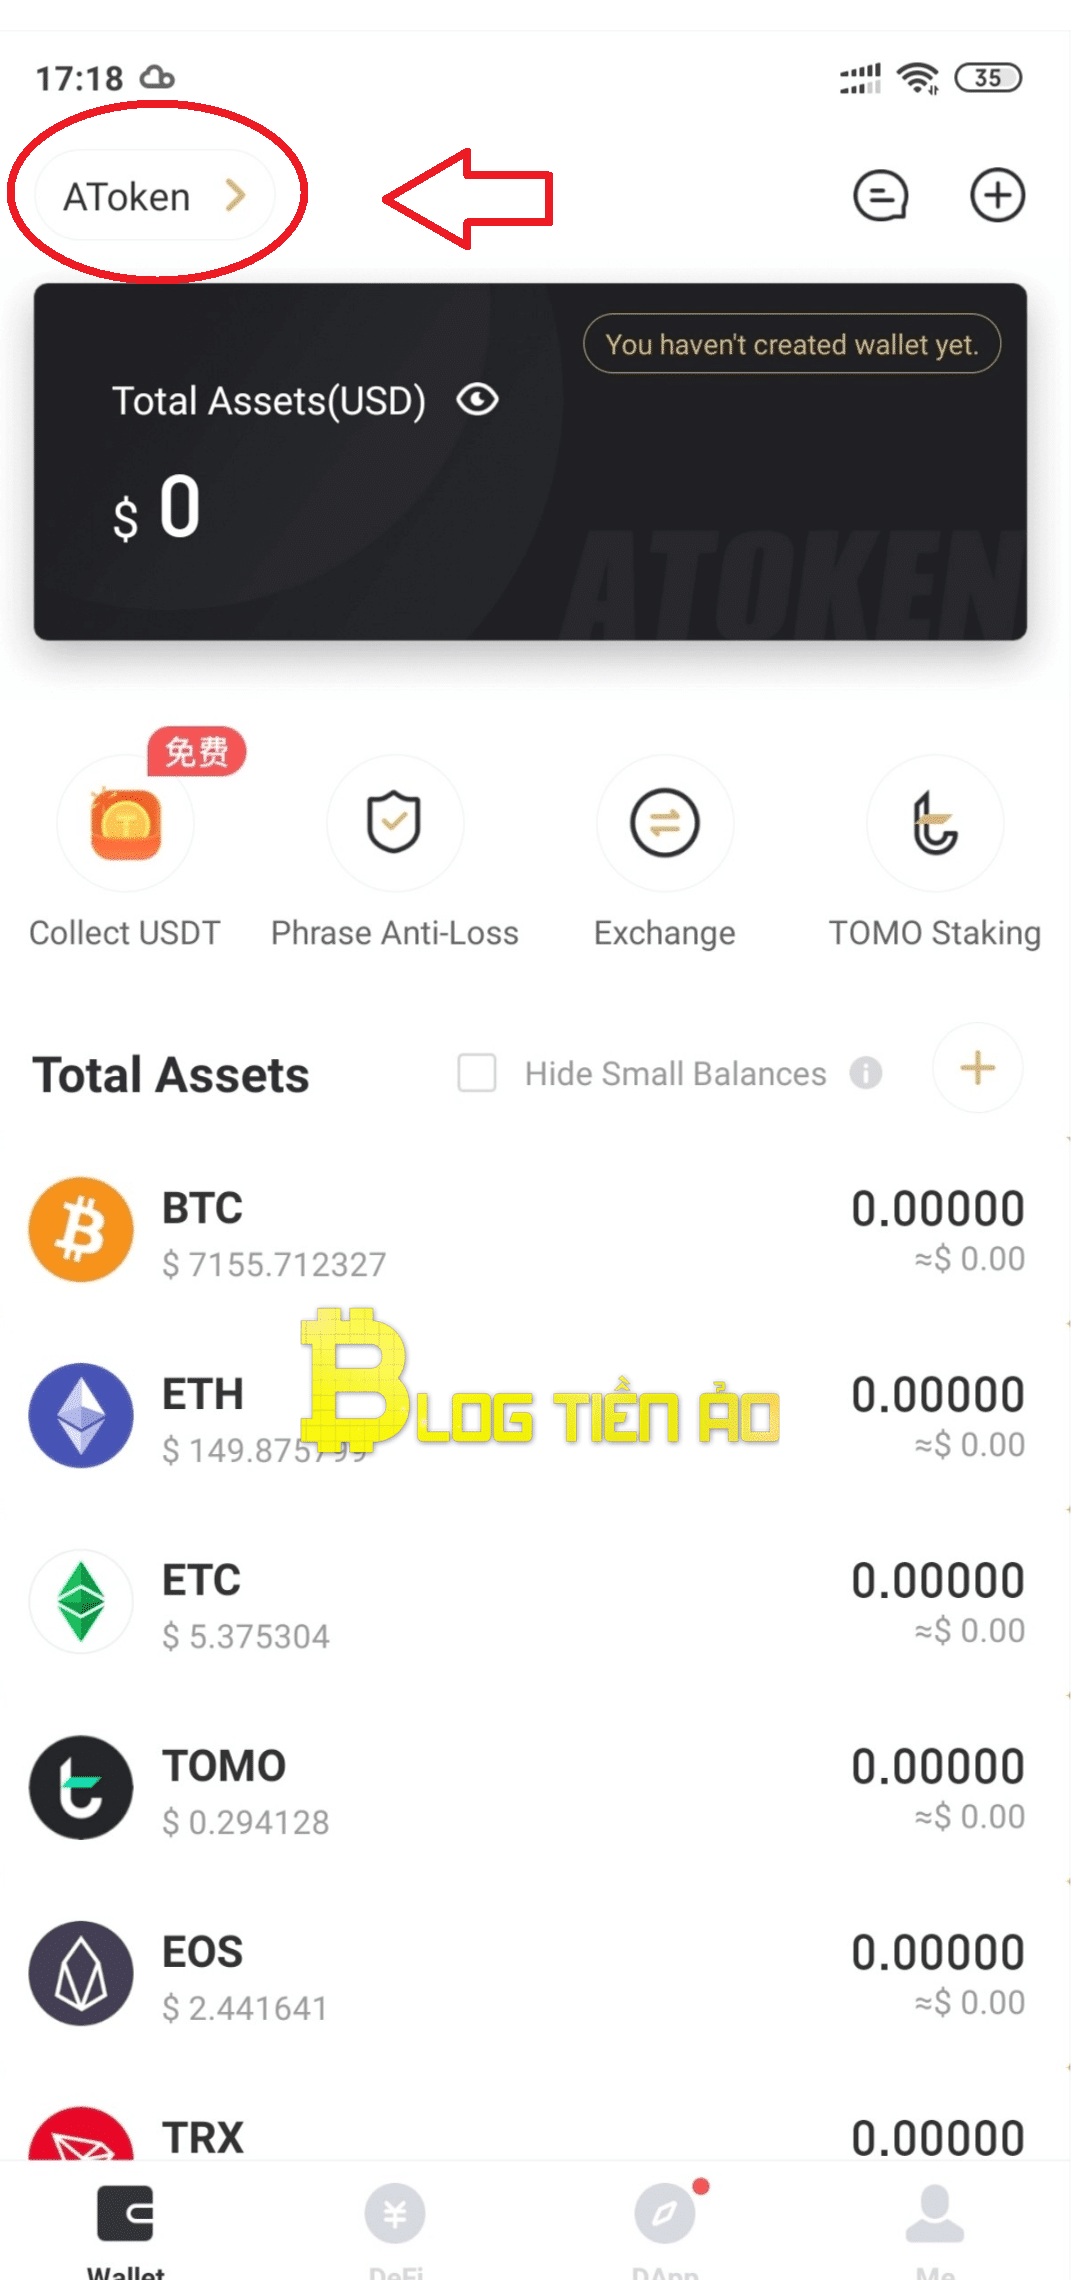 Select token to return to the homepage